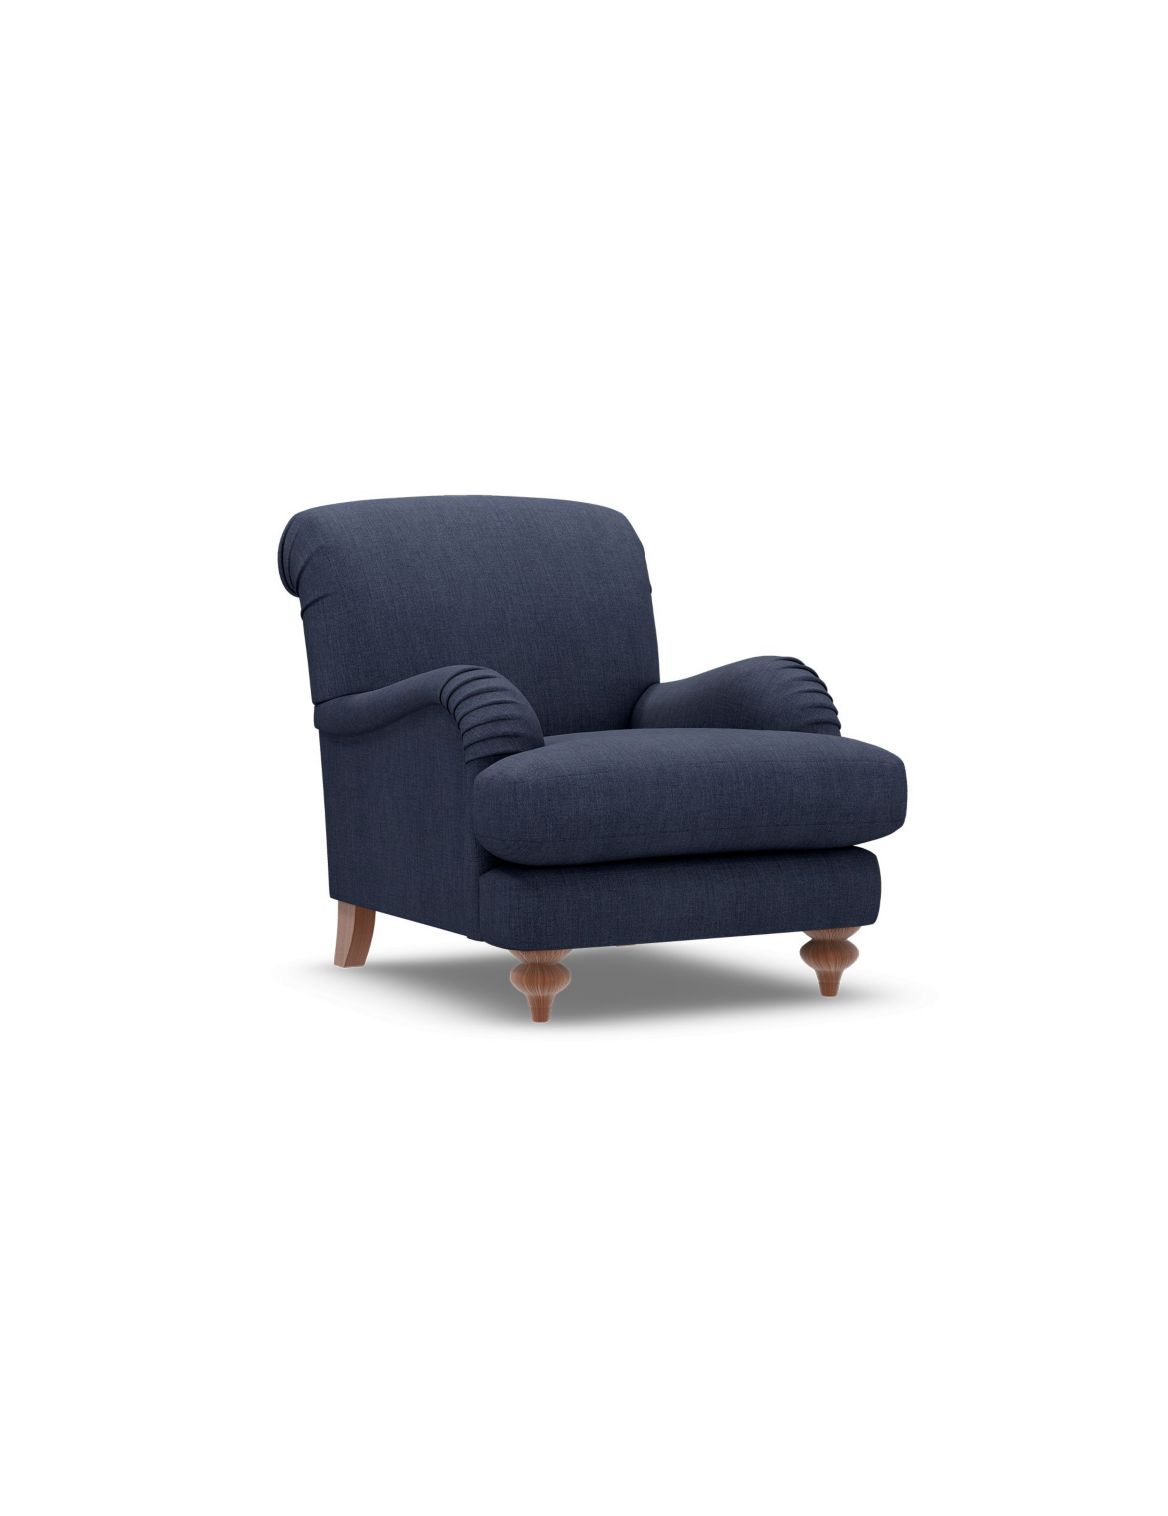 Isabelle Armchair navy